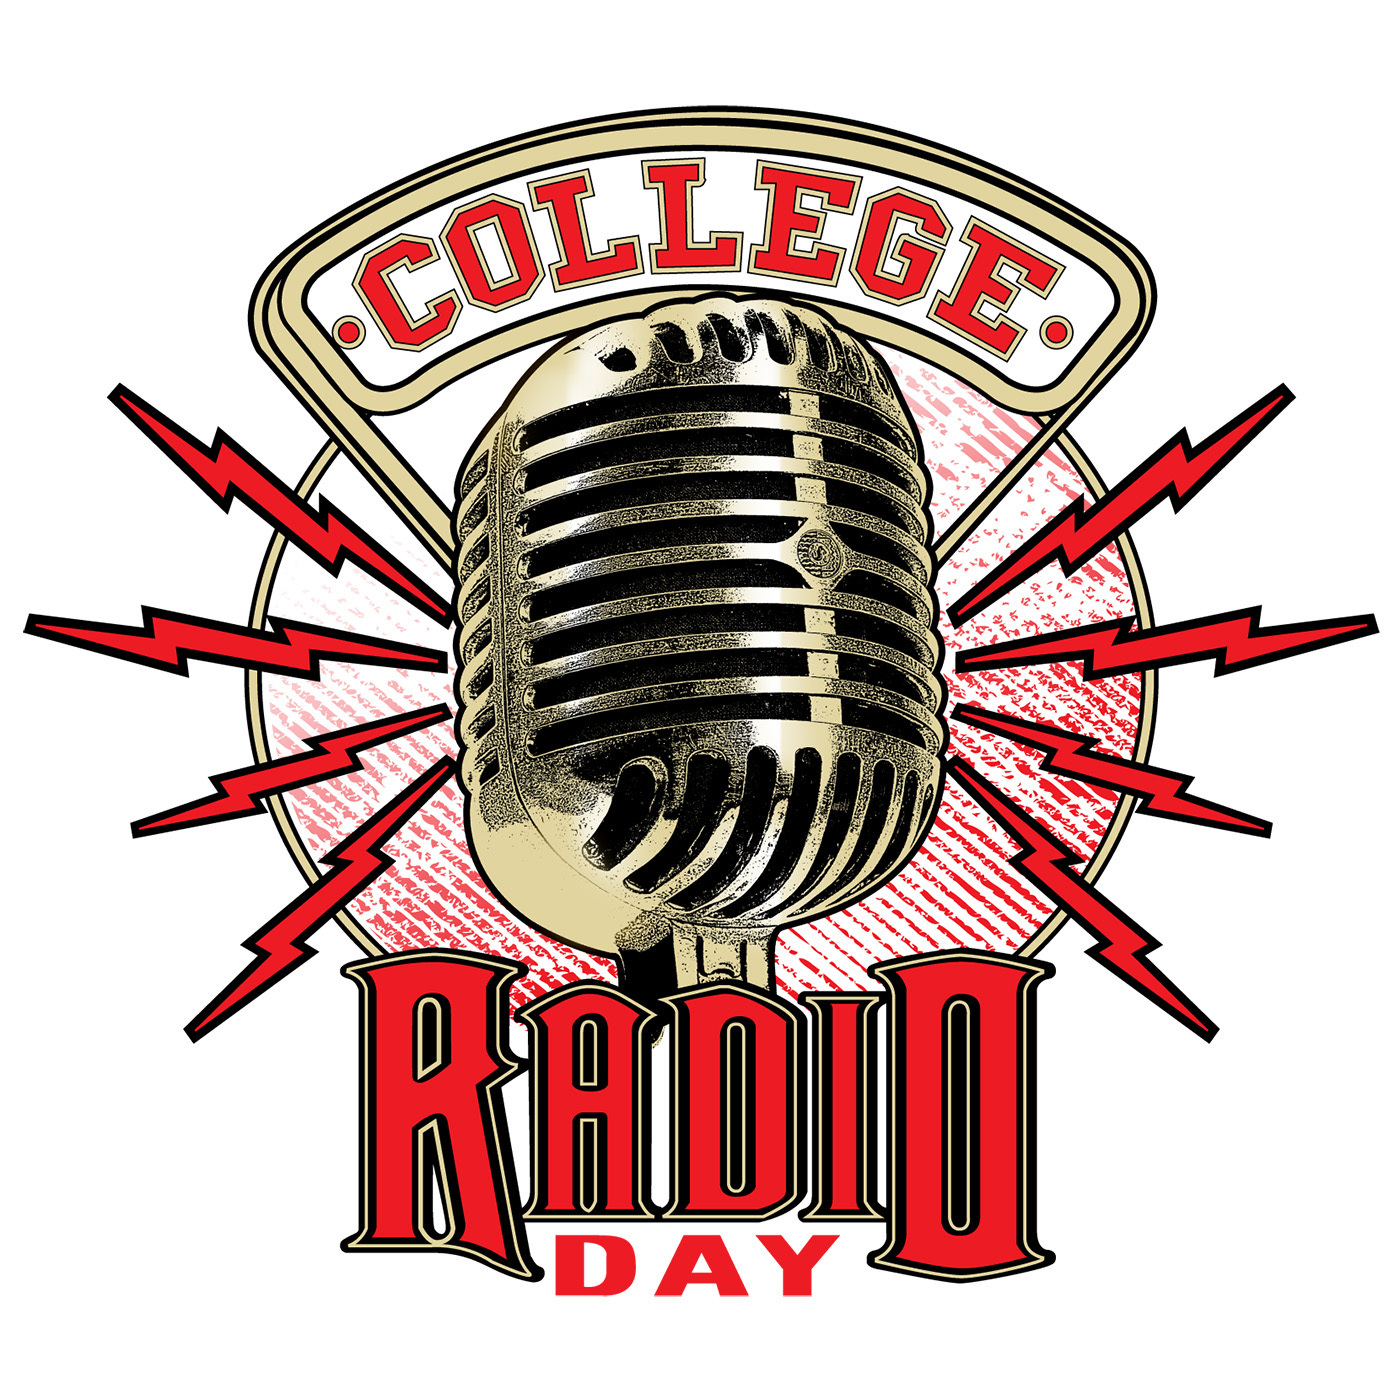 World College Radio Day founder Dr. Rob Quicke Image